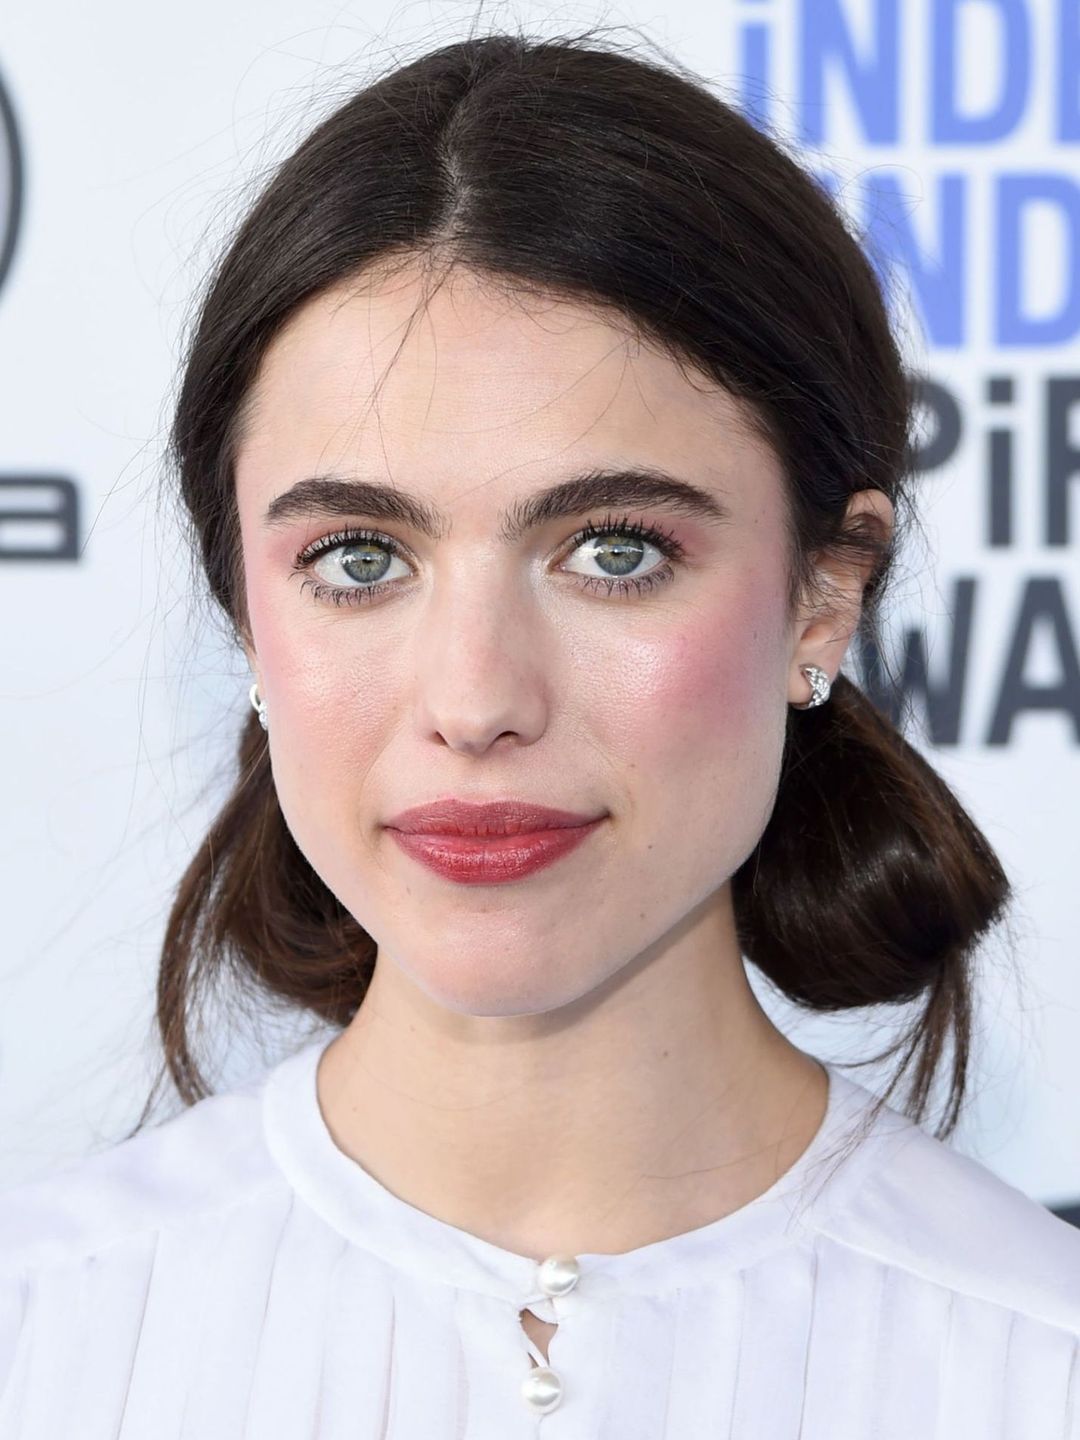 Margaret Qualley who is her father